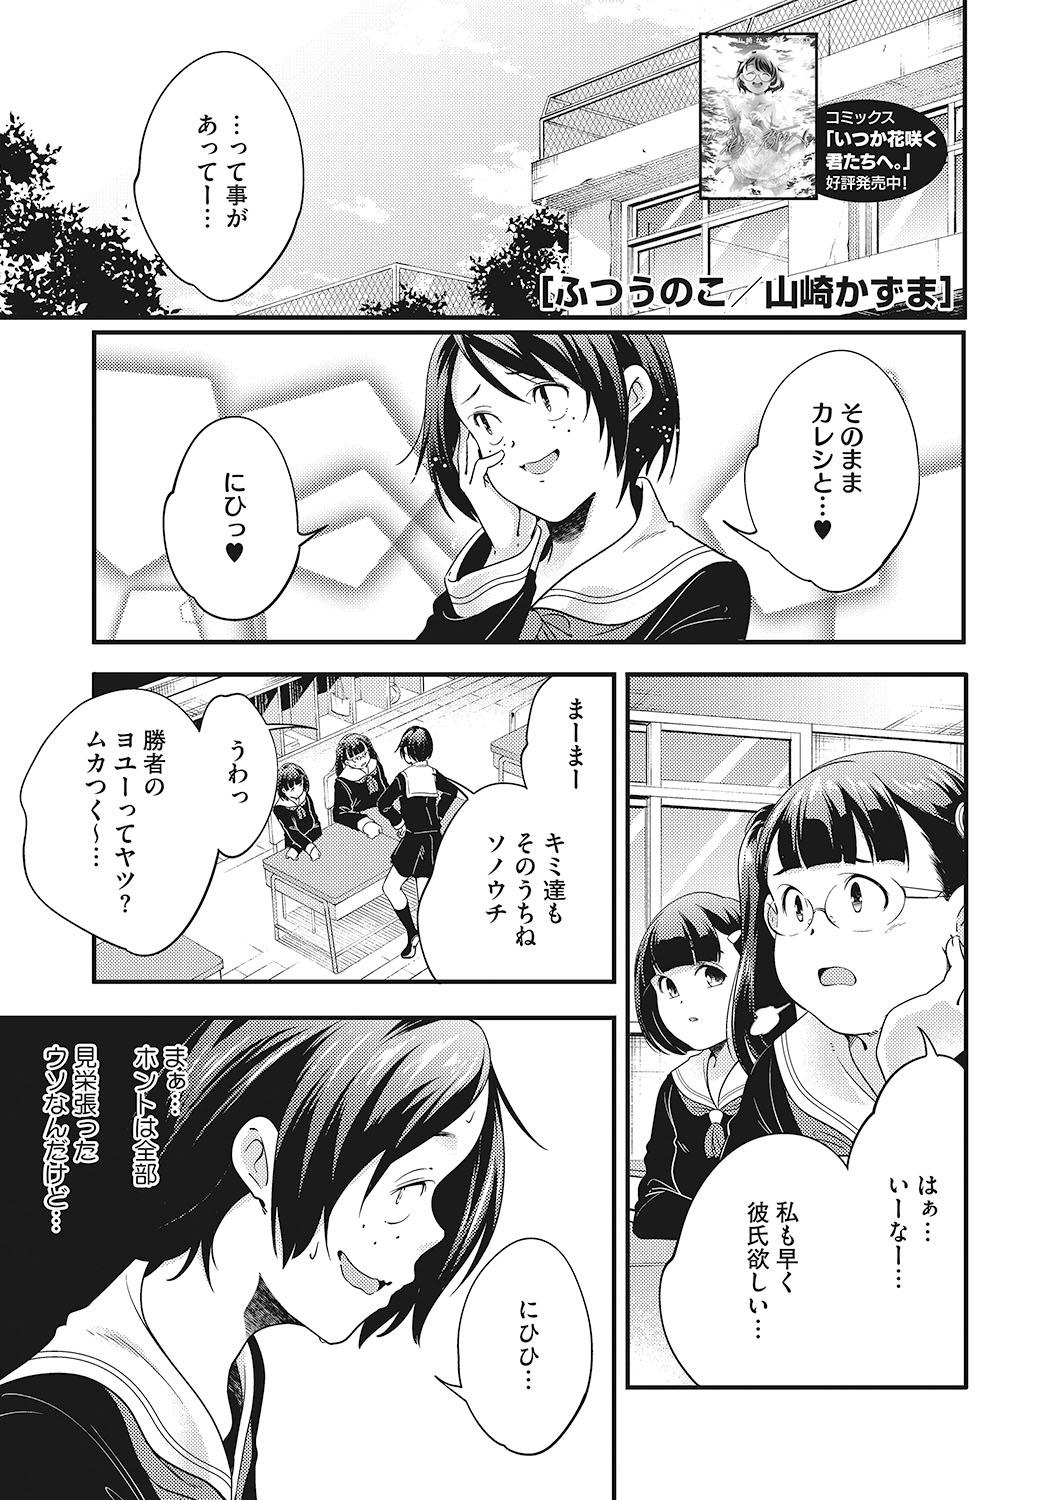 Exotic [Anthology] LQ -Little Queen- Vol. 45 [Digital] Boss - Page 10